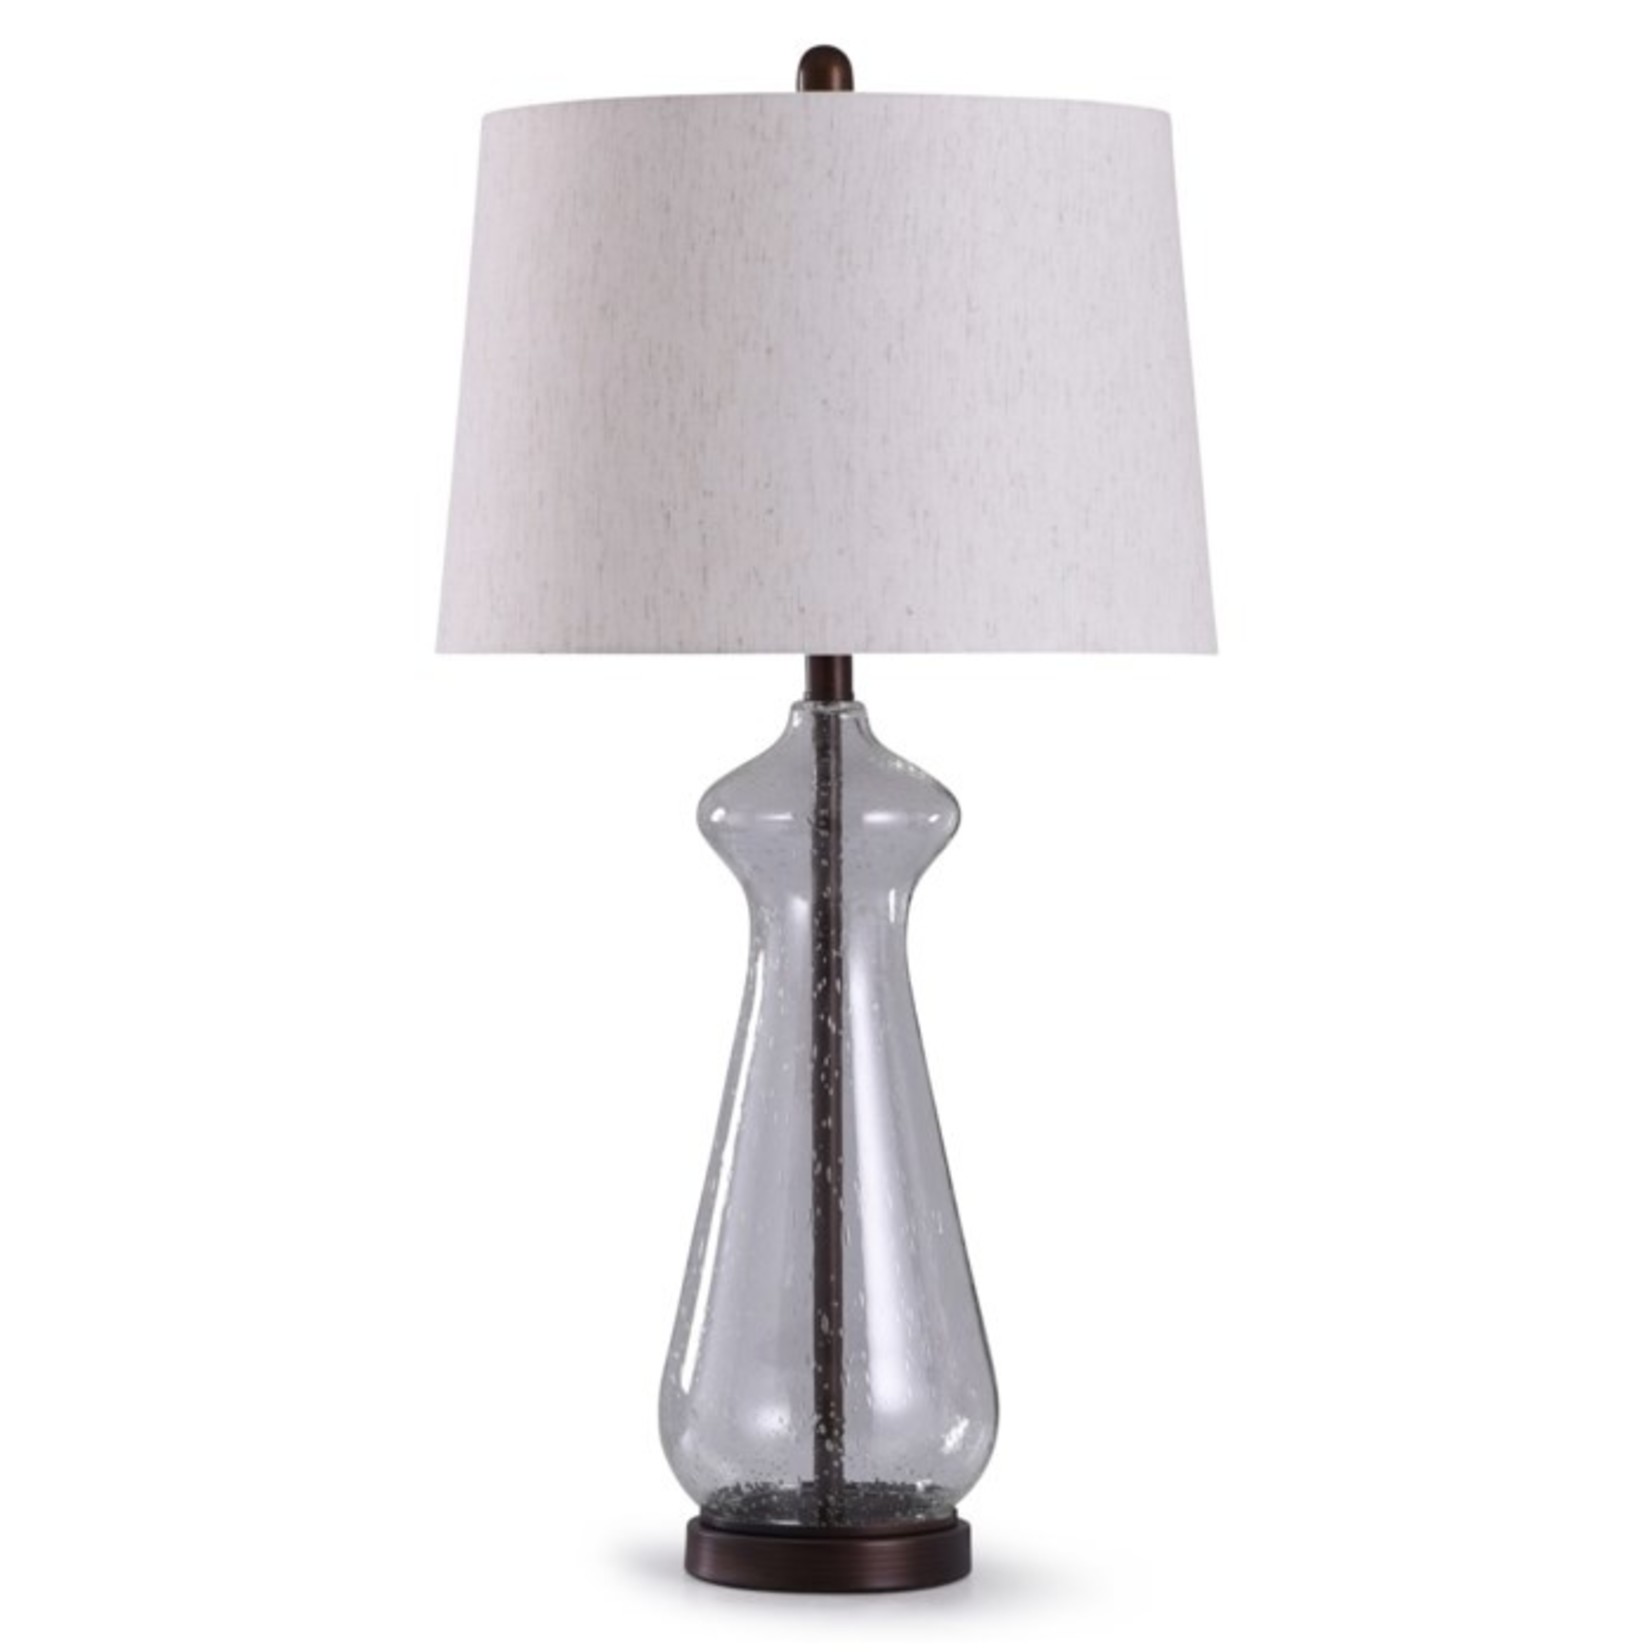 Oil Rubbed Bronze Seeded Glass Table Lamp